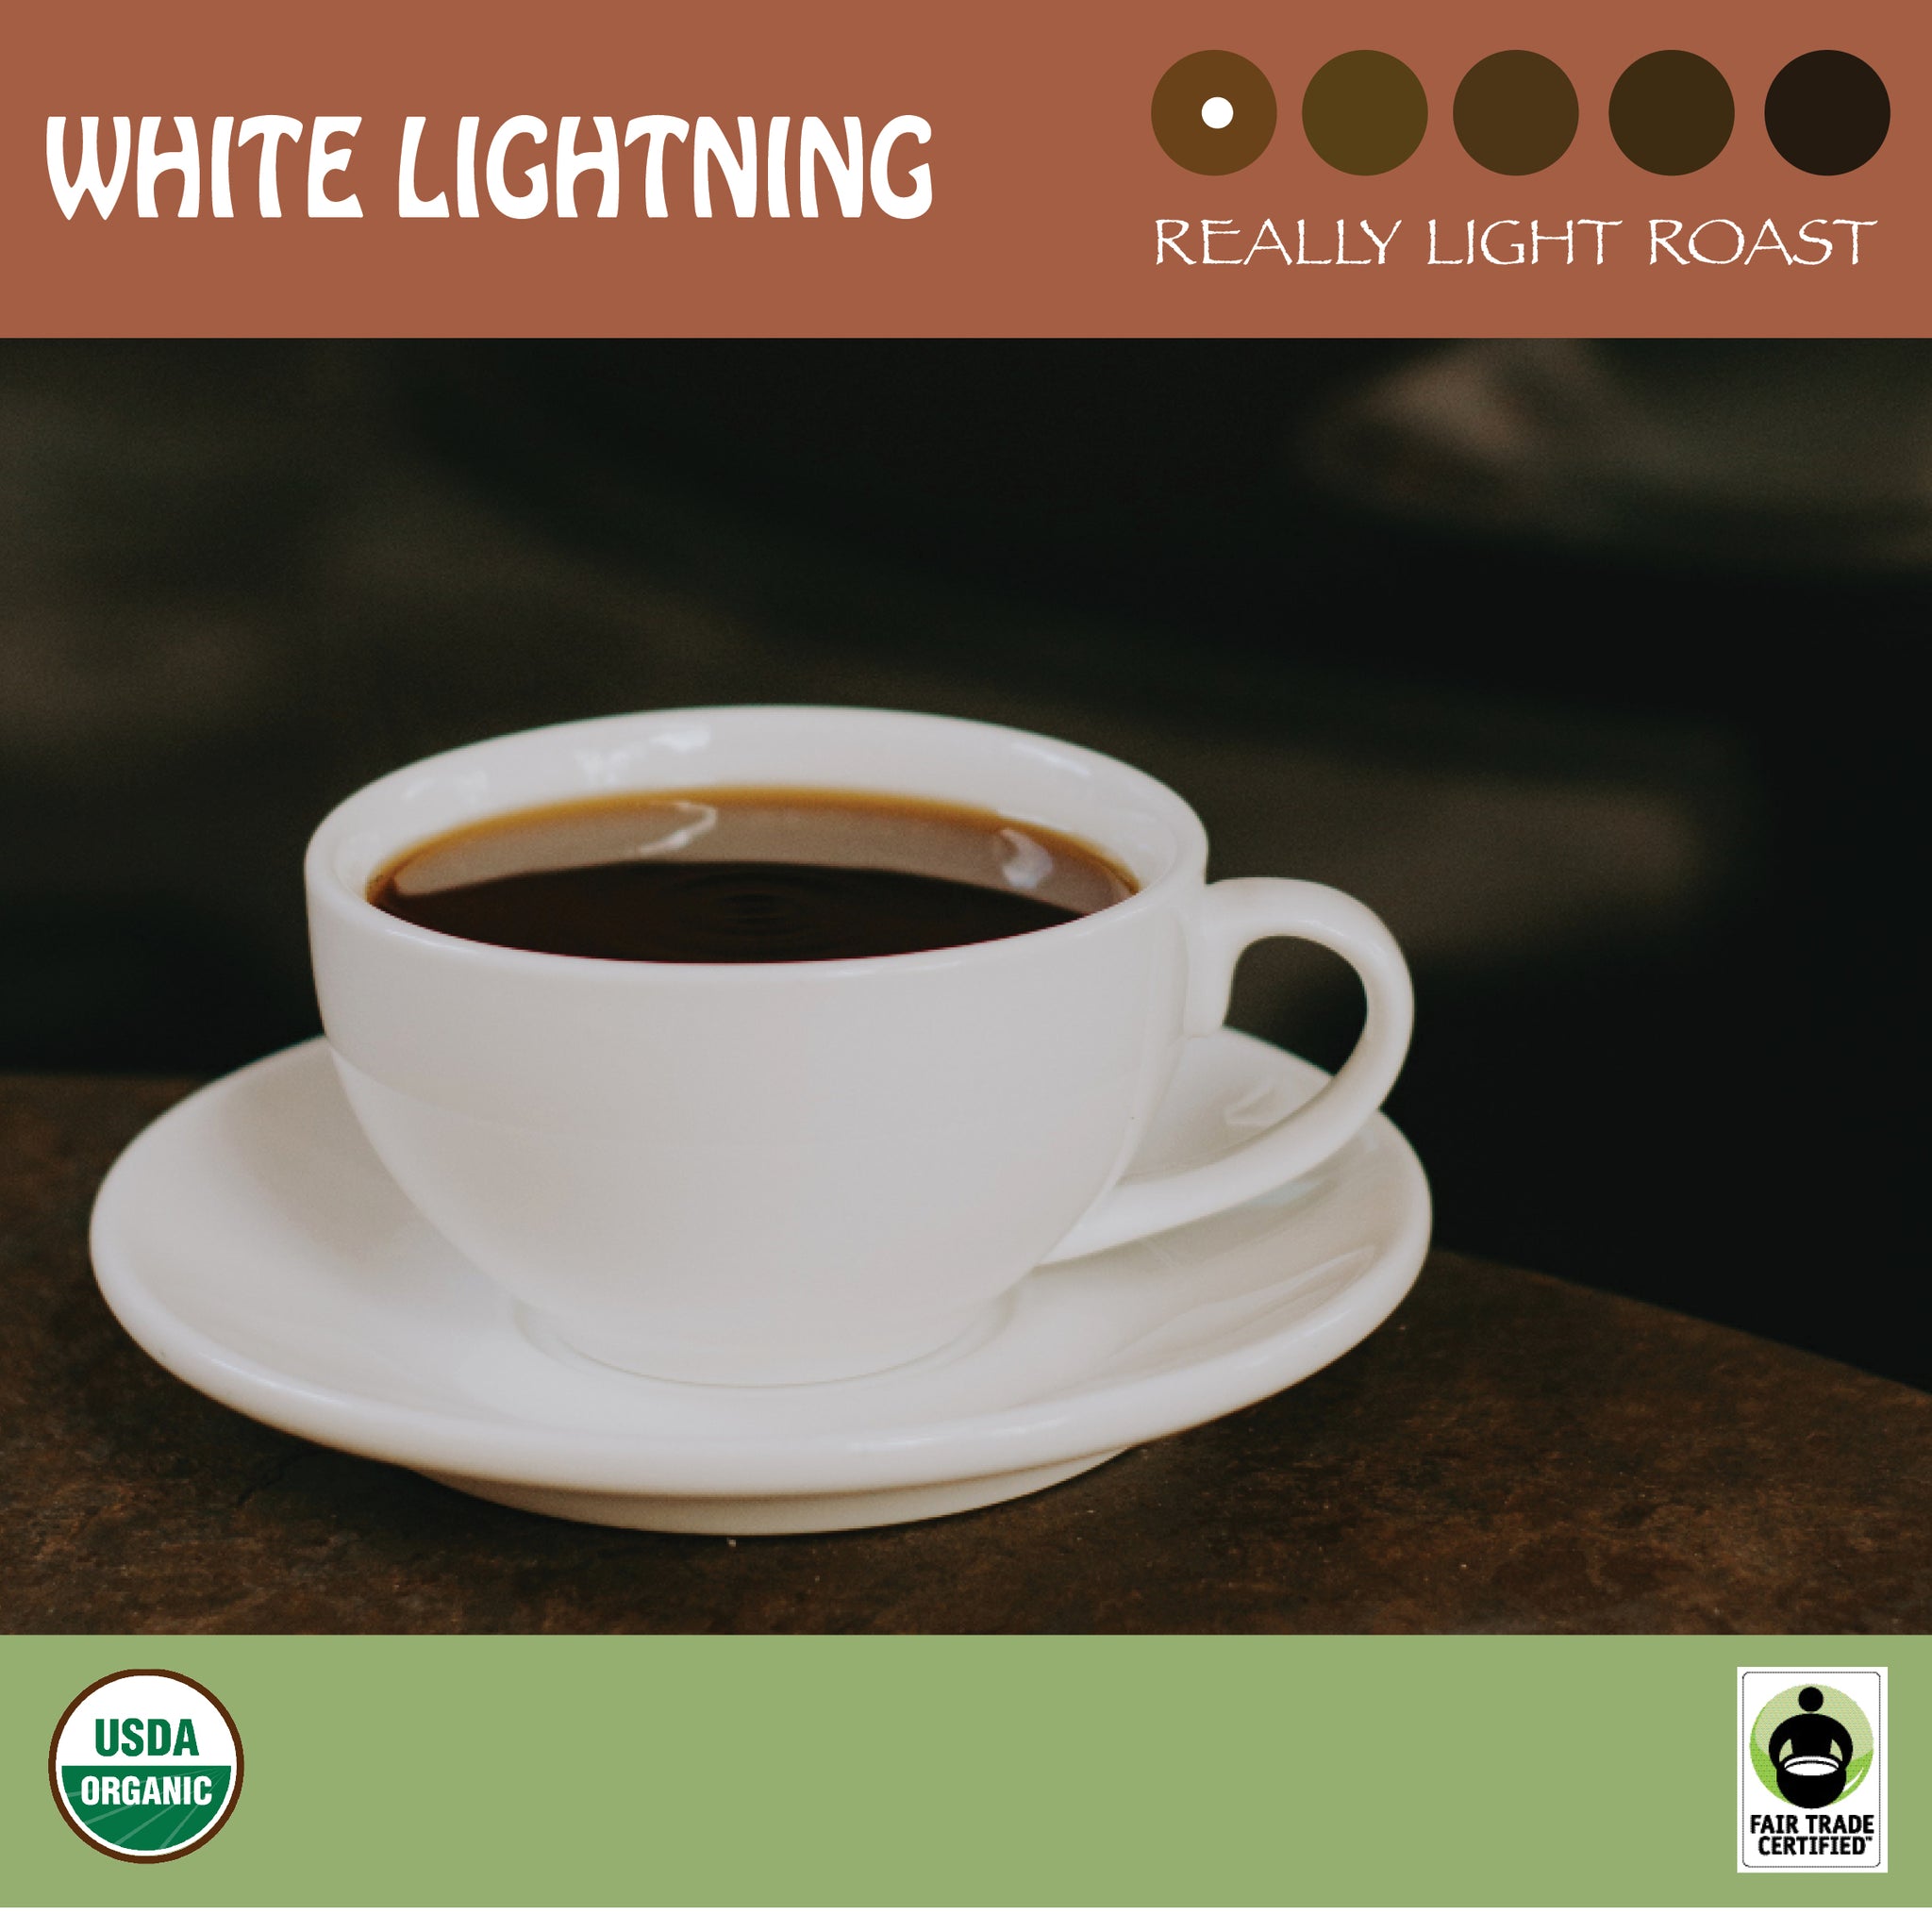 A white cup of coffee on a dark background. Representing Signature Coffee's really-light White Lightning coffee. USDA organic and Fair Trade Certified logos.